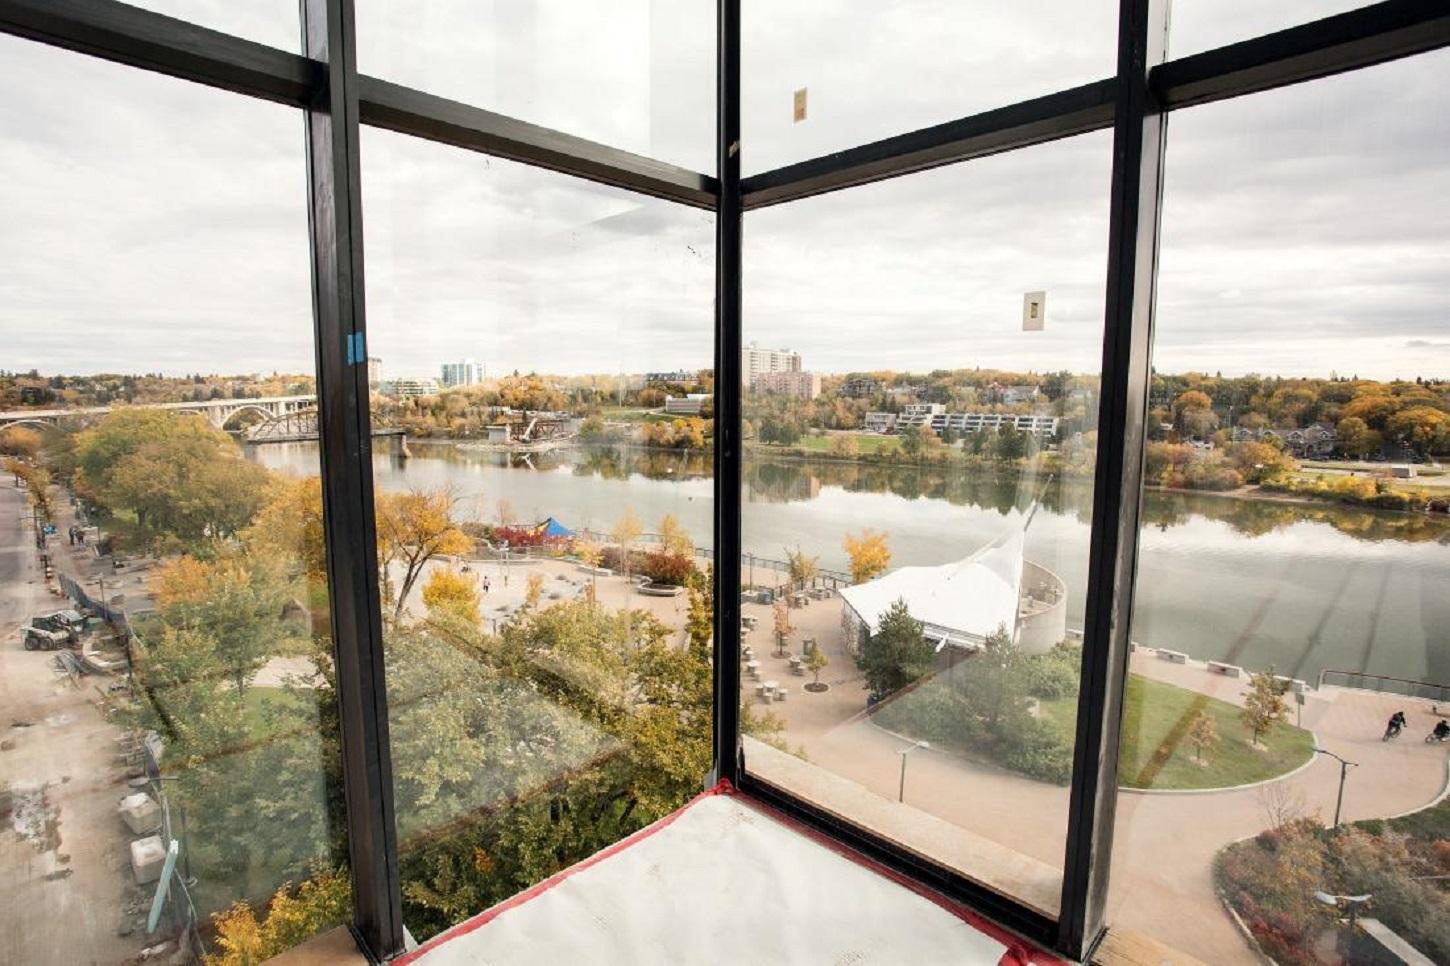 Riverview Room with its magnificent views seats up to 350